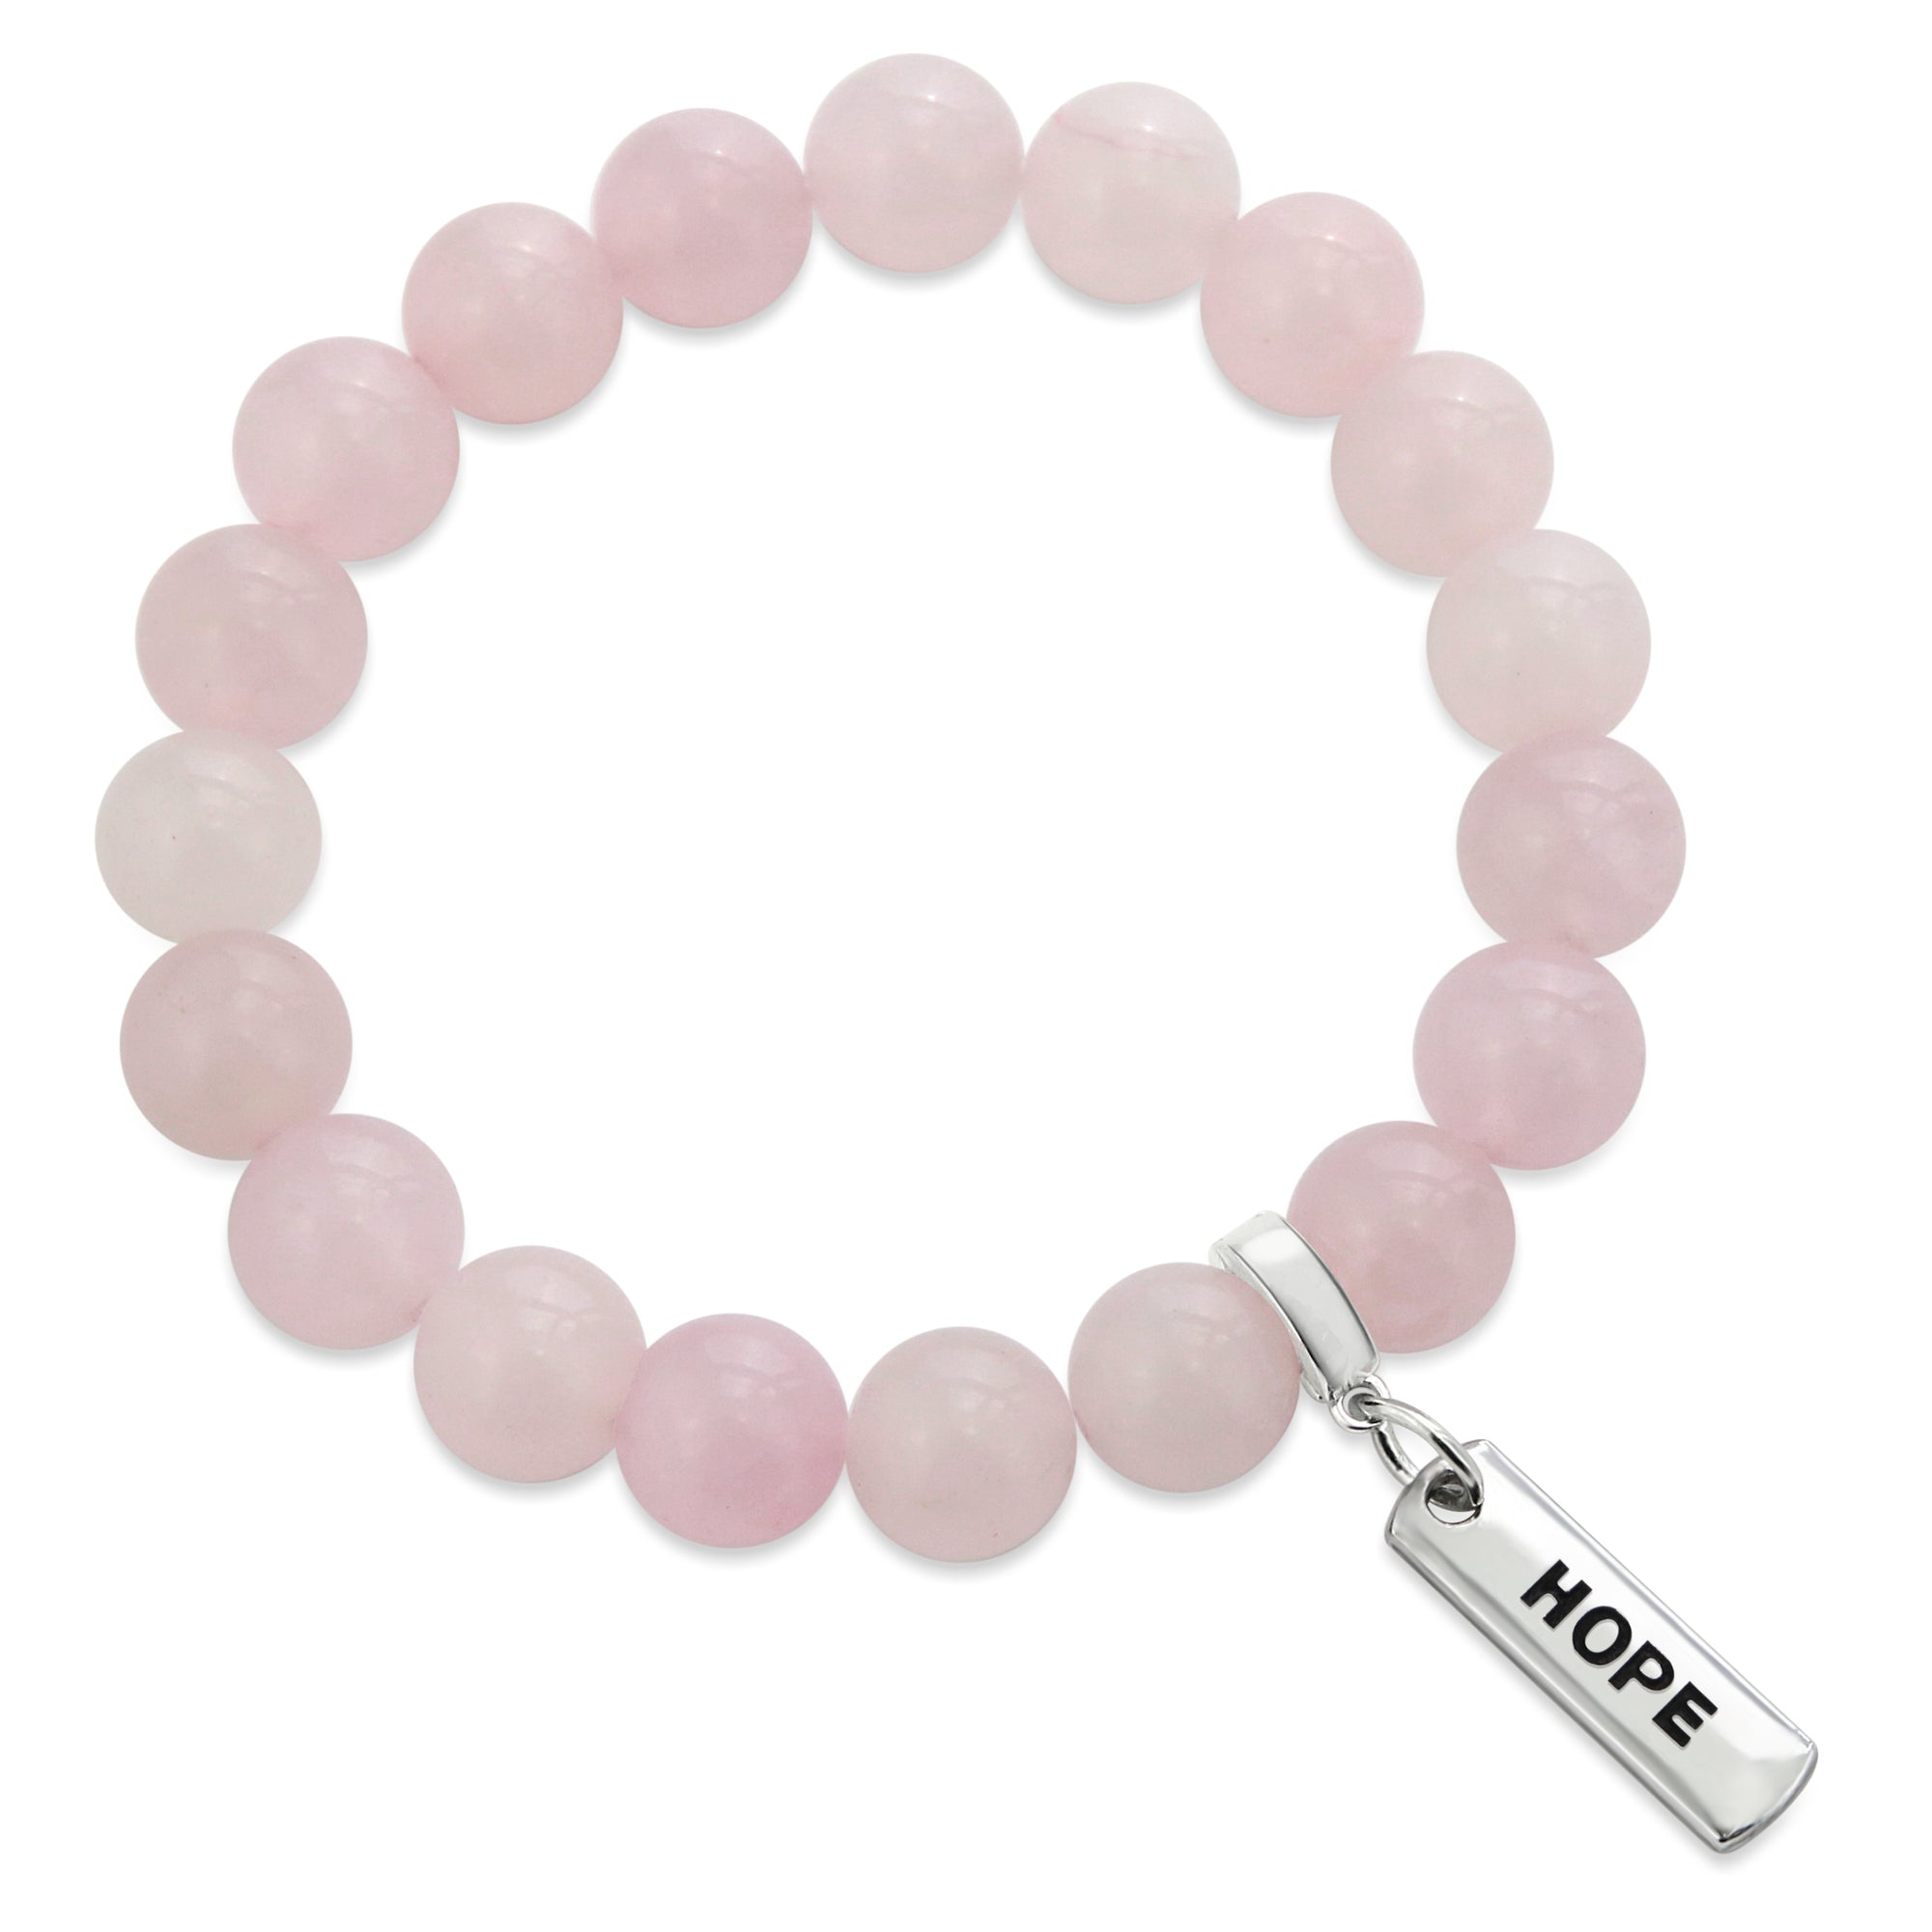 Rose quartz stone bead bracelet with silver clip and inspiring word charm. 